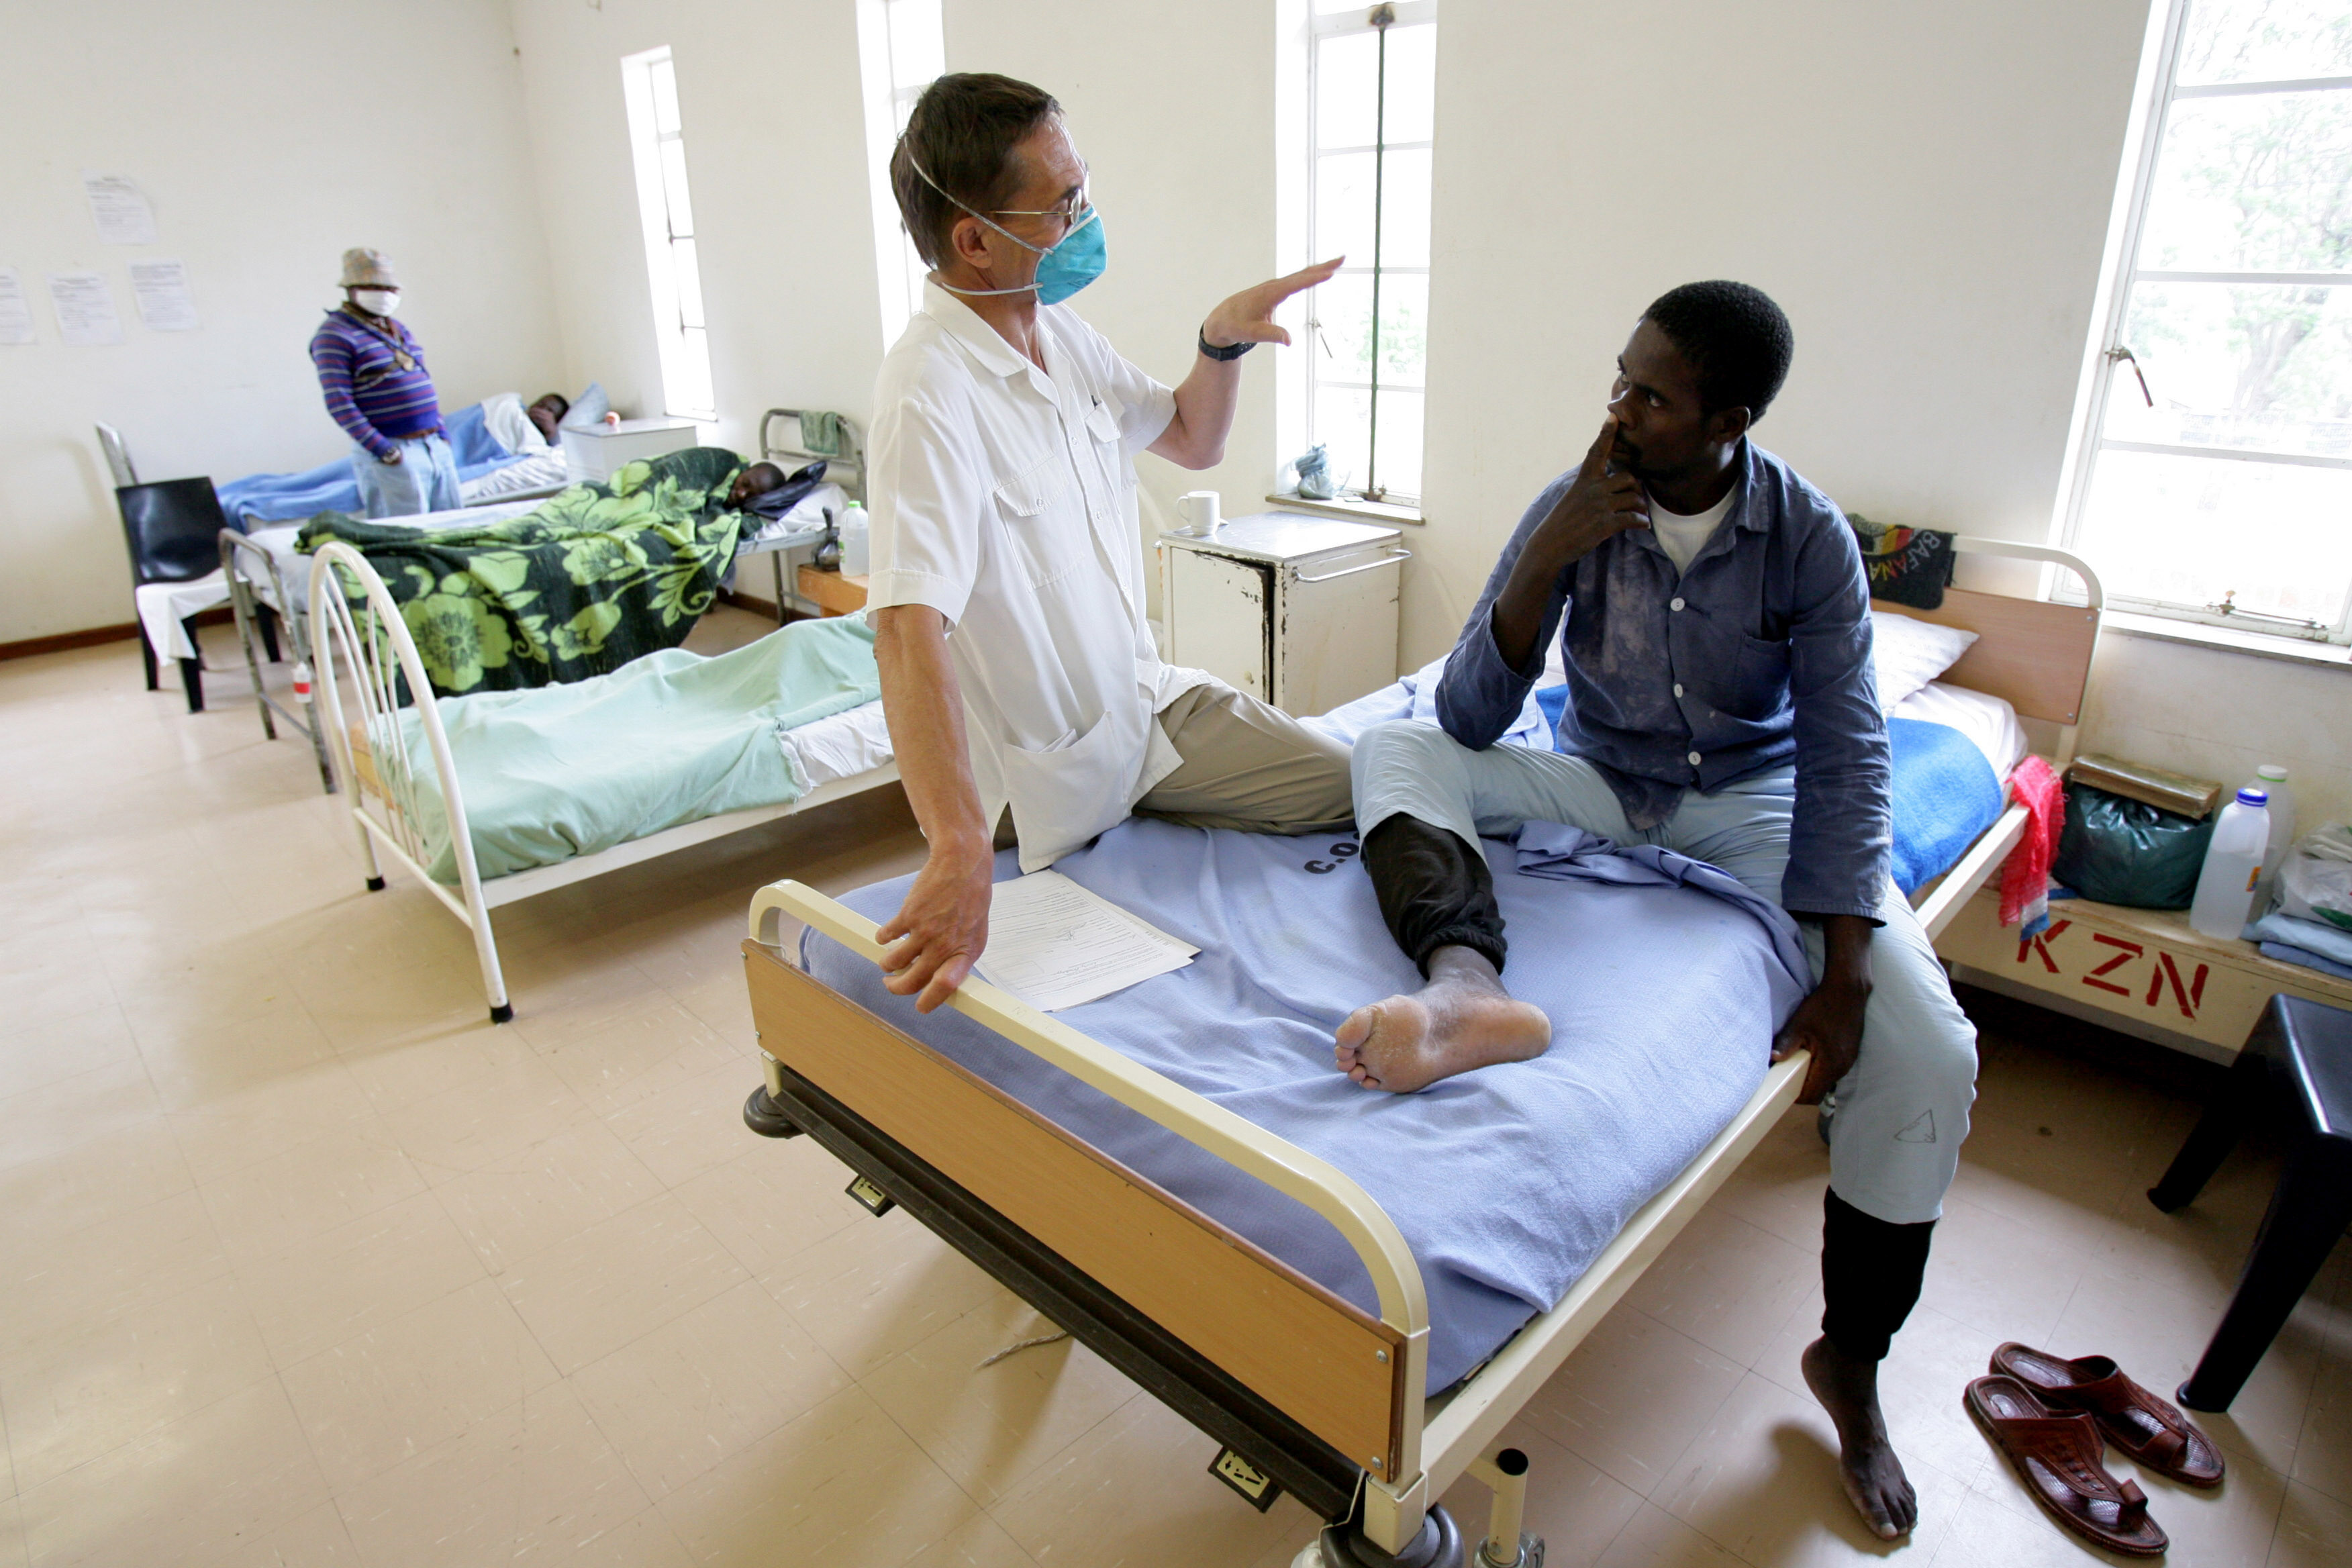 A health care worker treats a tuberculosis patient at a rural hospital at Tugela Ferry in South Africa's impoverished KwaZulu Natal province, October 28, 2006. A new strain of the disease, called extreme drug resistant tuberculosis (XDR-TB), has killed at least 79 people in the area since January 2005, prompting concern from the World Health Organisation who fear XDR-TB could become a major killer in AIDS-hit parts of Africa where governments have been slow to roll out TB control programs. REUTERS\Mike Hutchings  (SOUTH AFRICA)